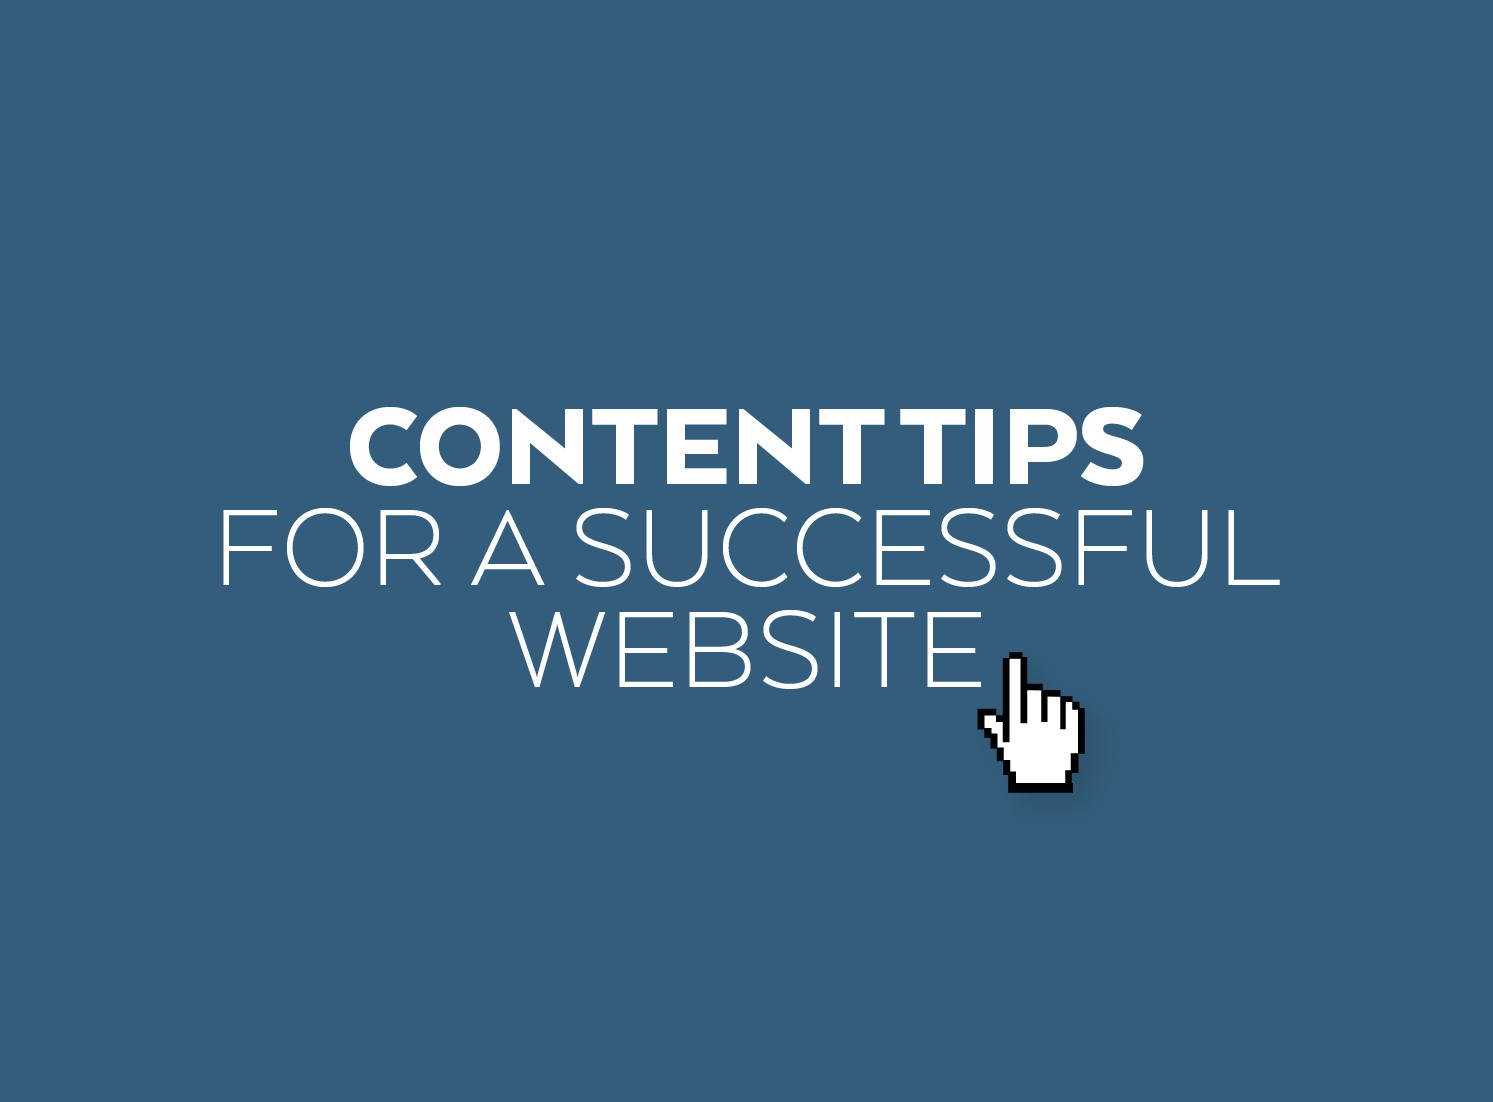 Content tips for a successful website by root studio